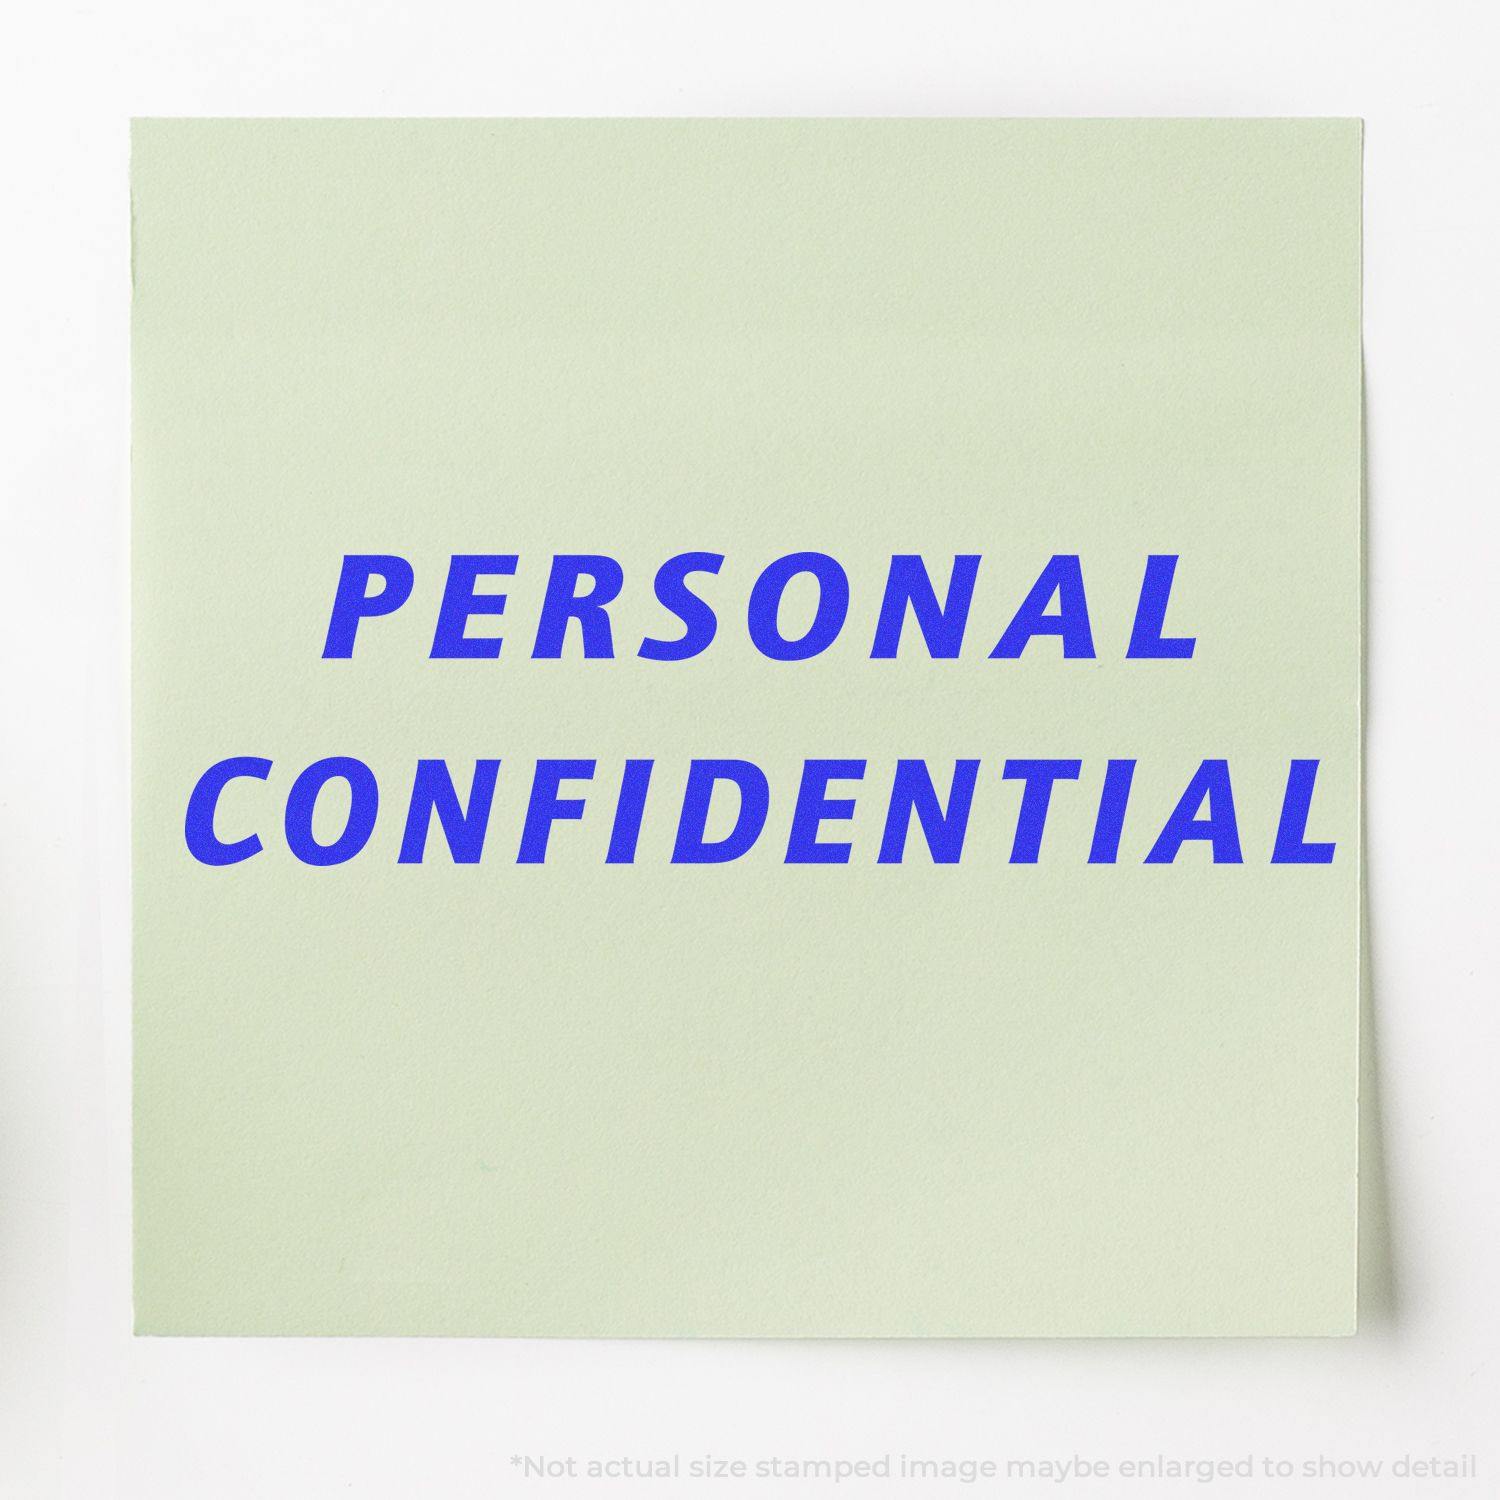 A stock office rubber stamp with a stamped image showing how the text "PERSONAL CONFIDENTIAL" in a large italic font is displayed after stamping.